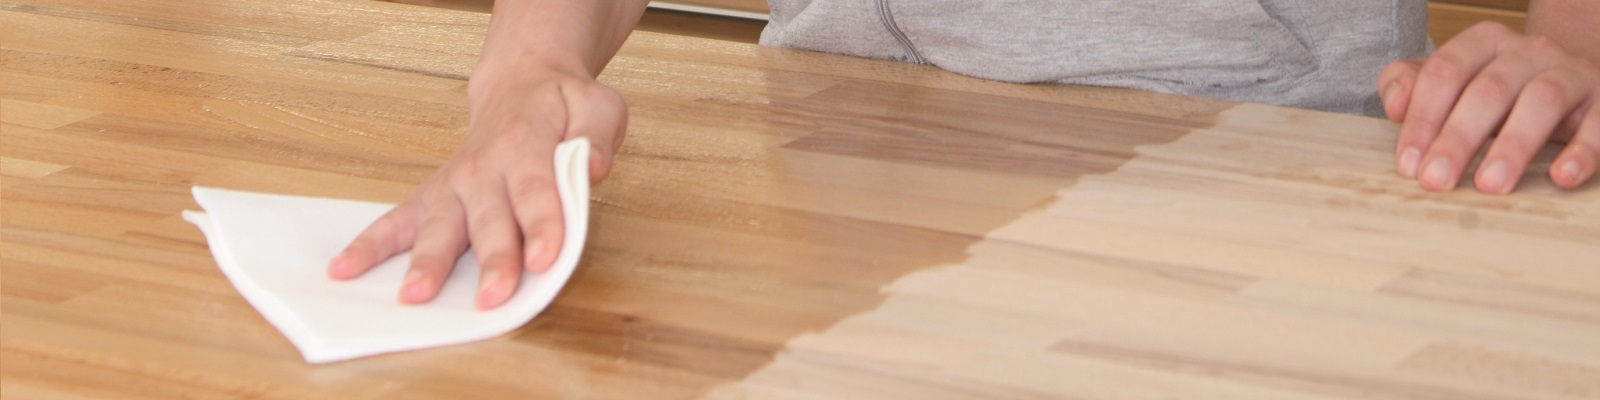 Wood care is quick and easy with Osmo products